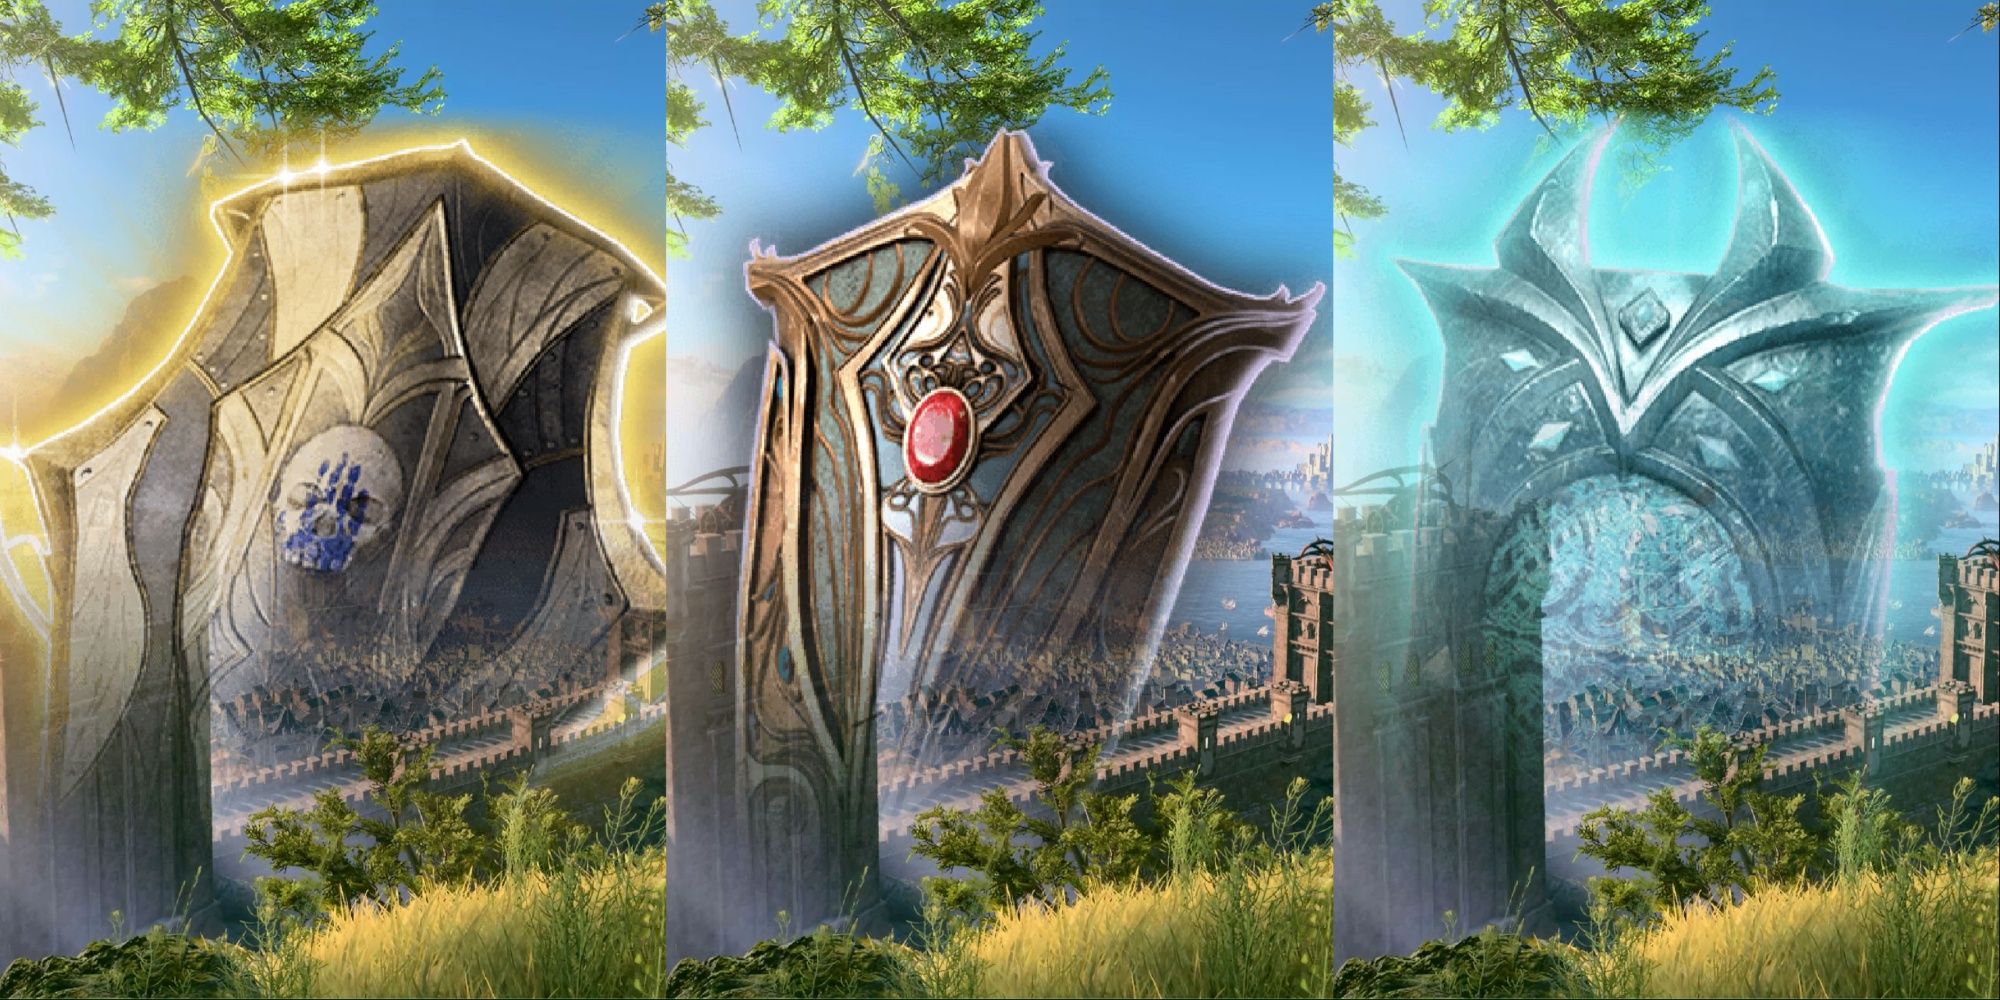 Ketheric's Shield, Viconia's Walking Fortress, and the Adamantine Shield, from Baldur's Gate 3